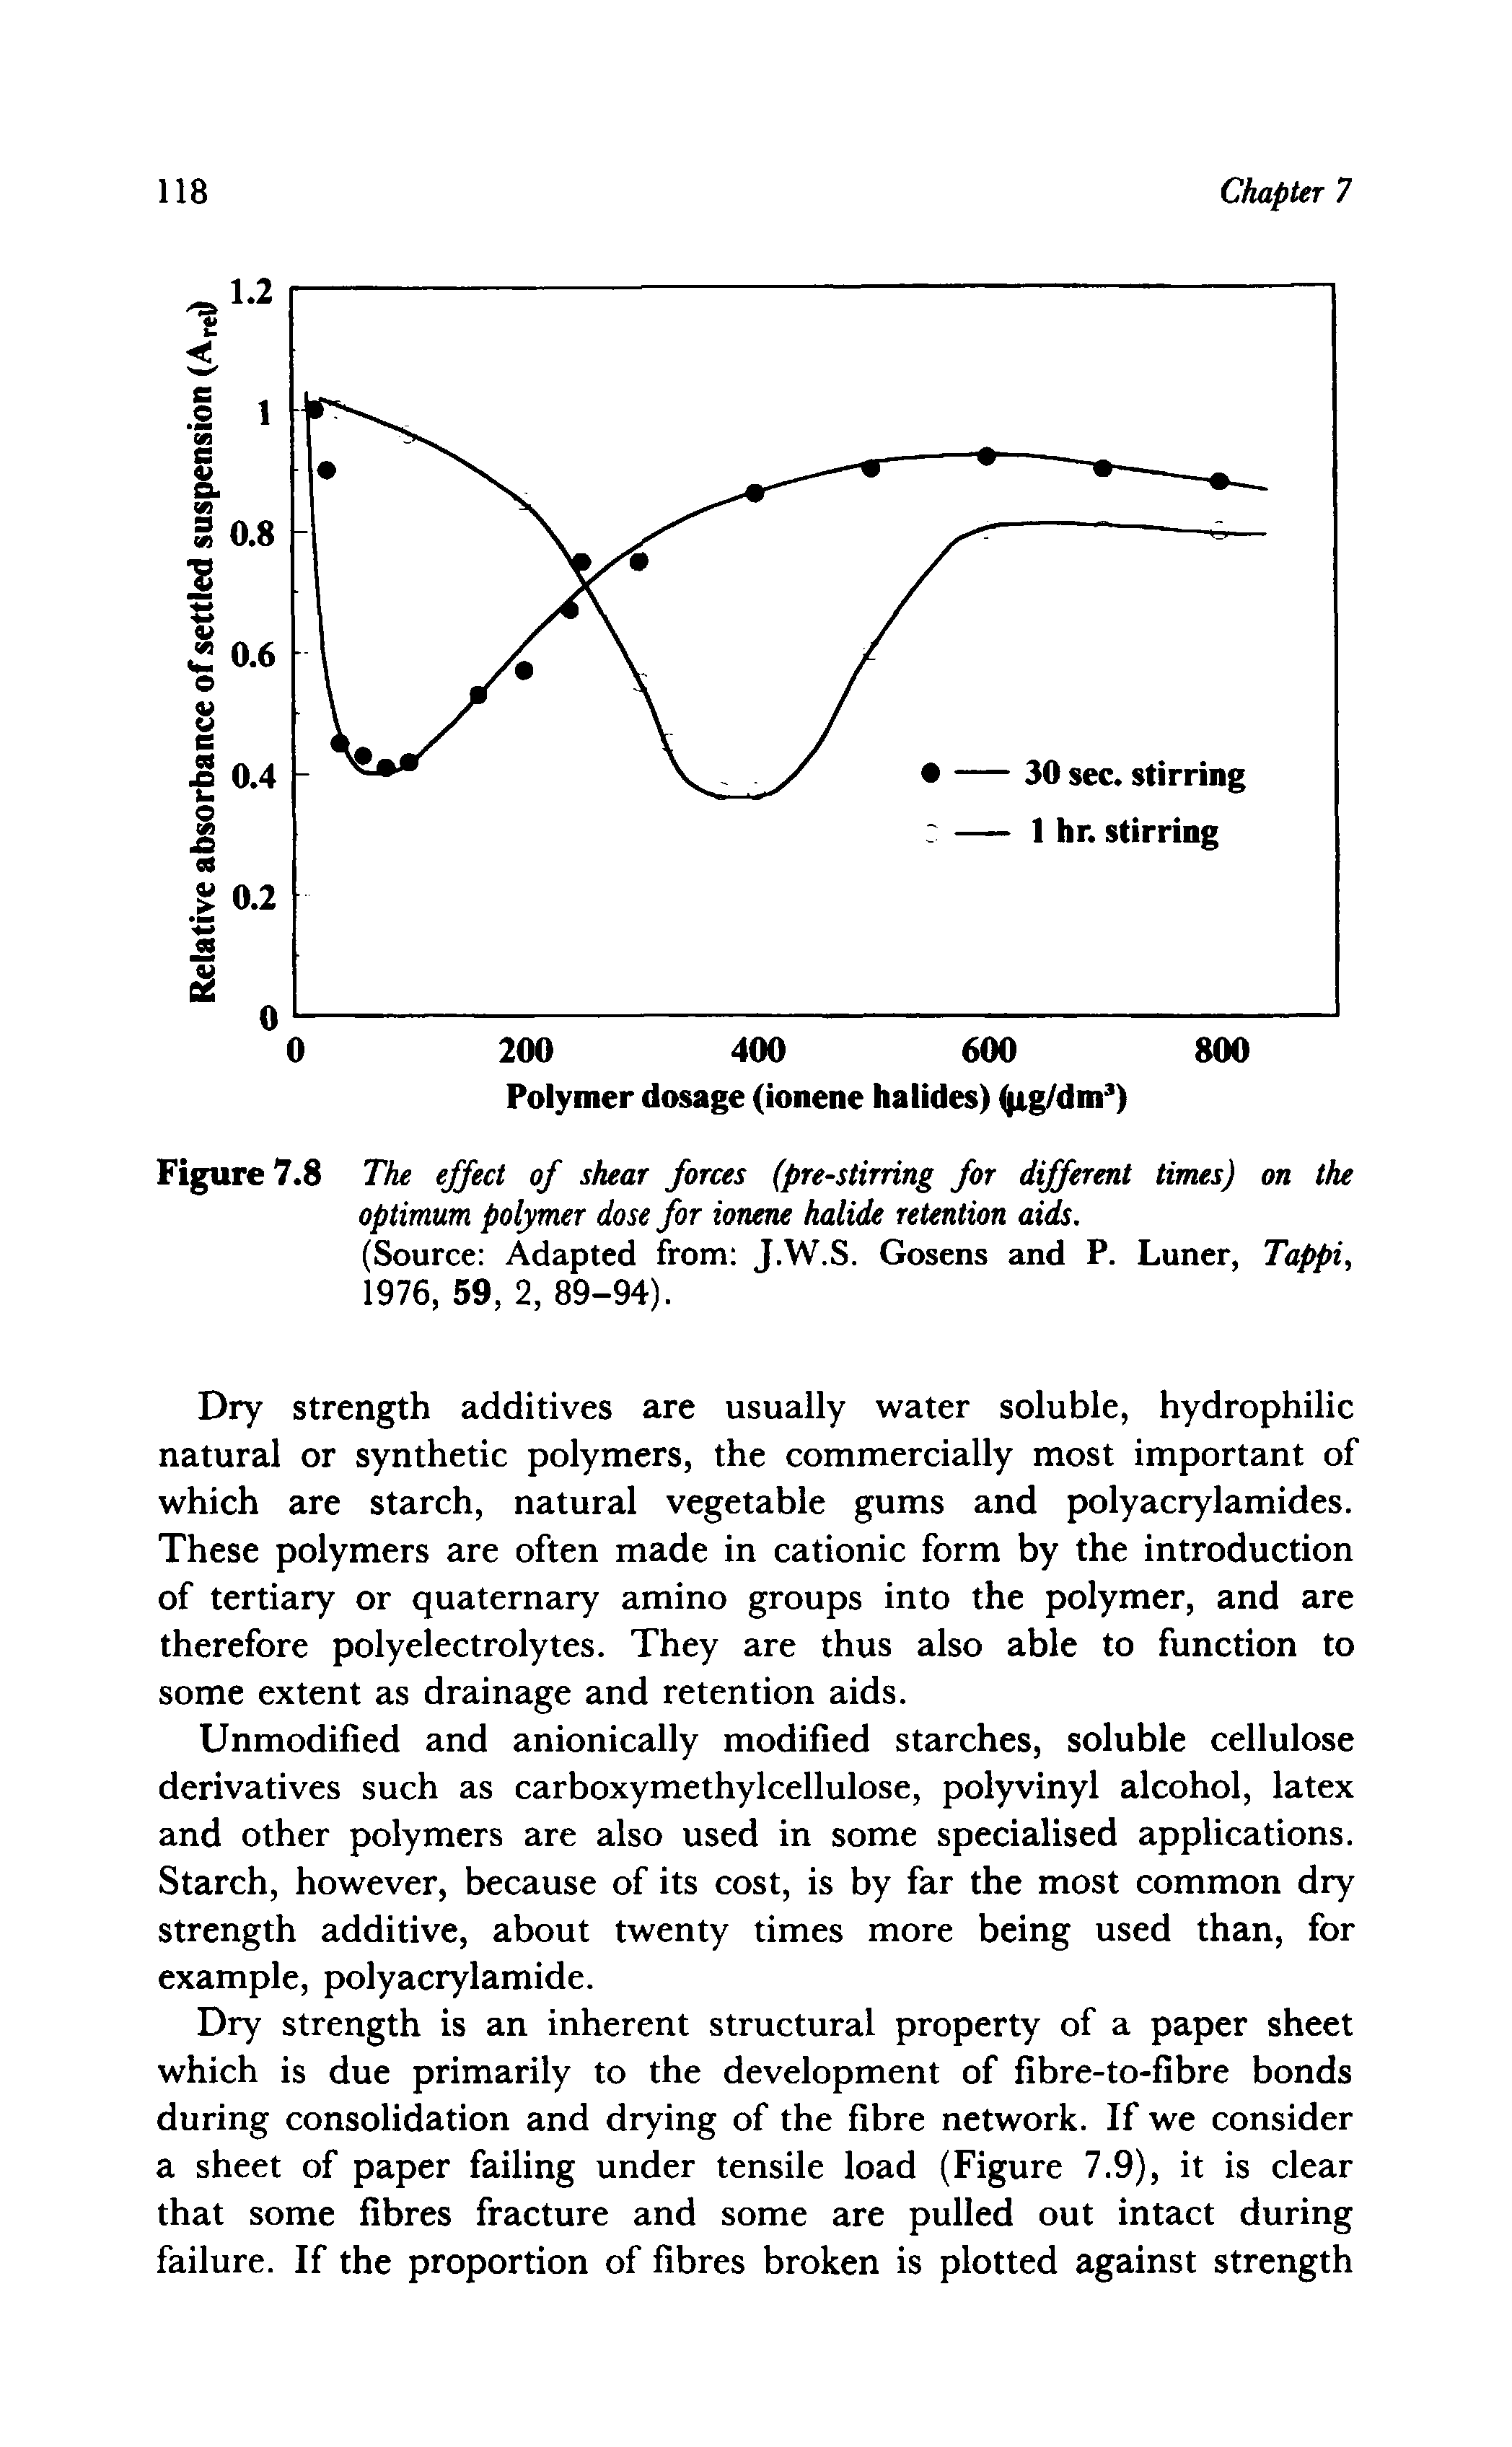 Figure 7.8 The effect of shear forces (pre-stirring for different times) on the optimum polymer dose for ionene halide retention aids.